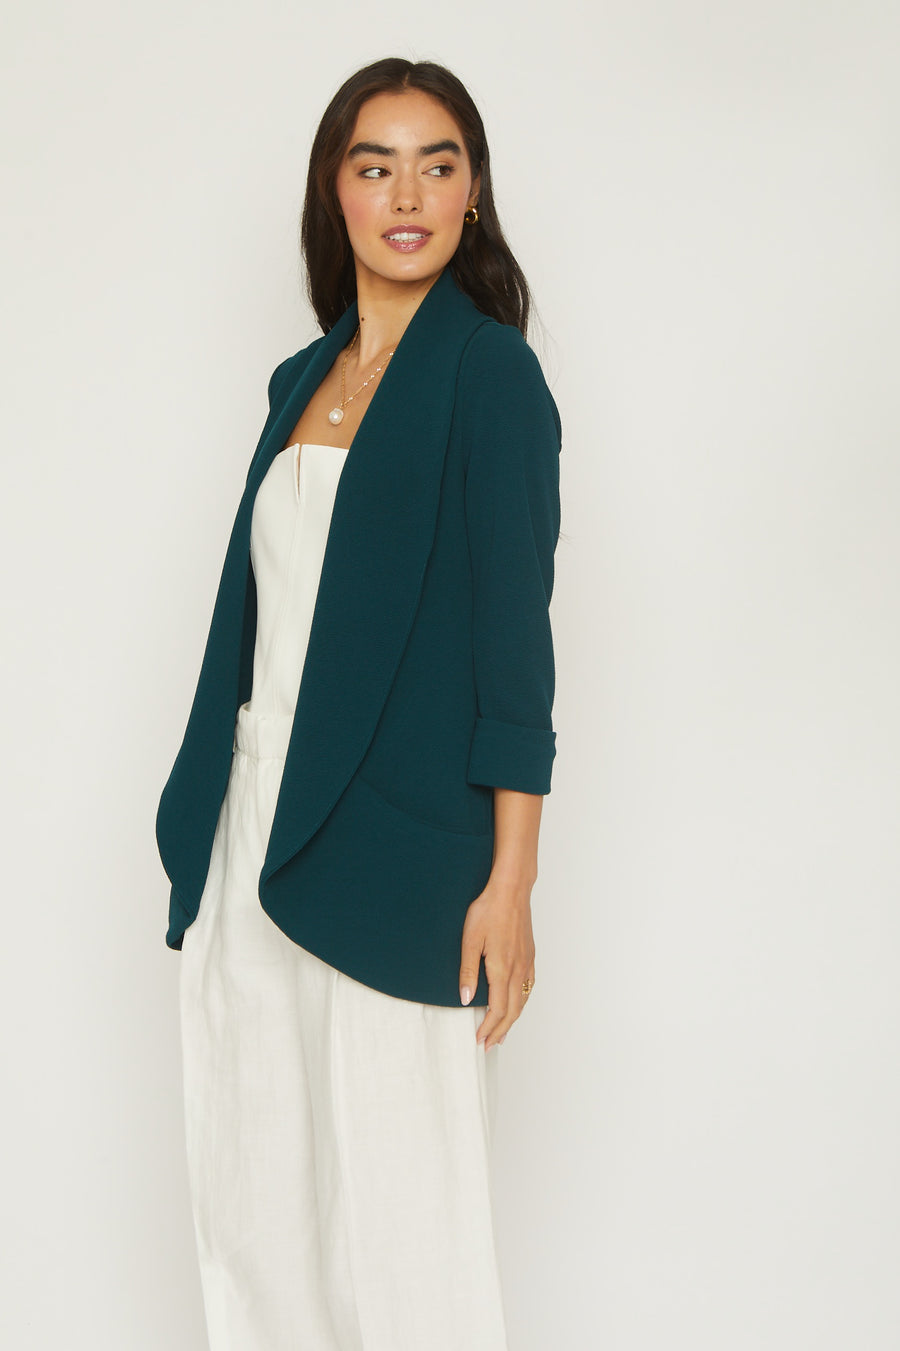 No Srcipt image - Images of 6 of 11 Melanie knit jacket, knit crepe fabric, 3/4 sleeve length, open front , shawl collar, front pocket, soft and stretch, teal color